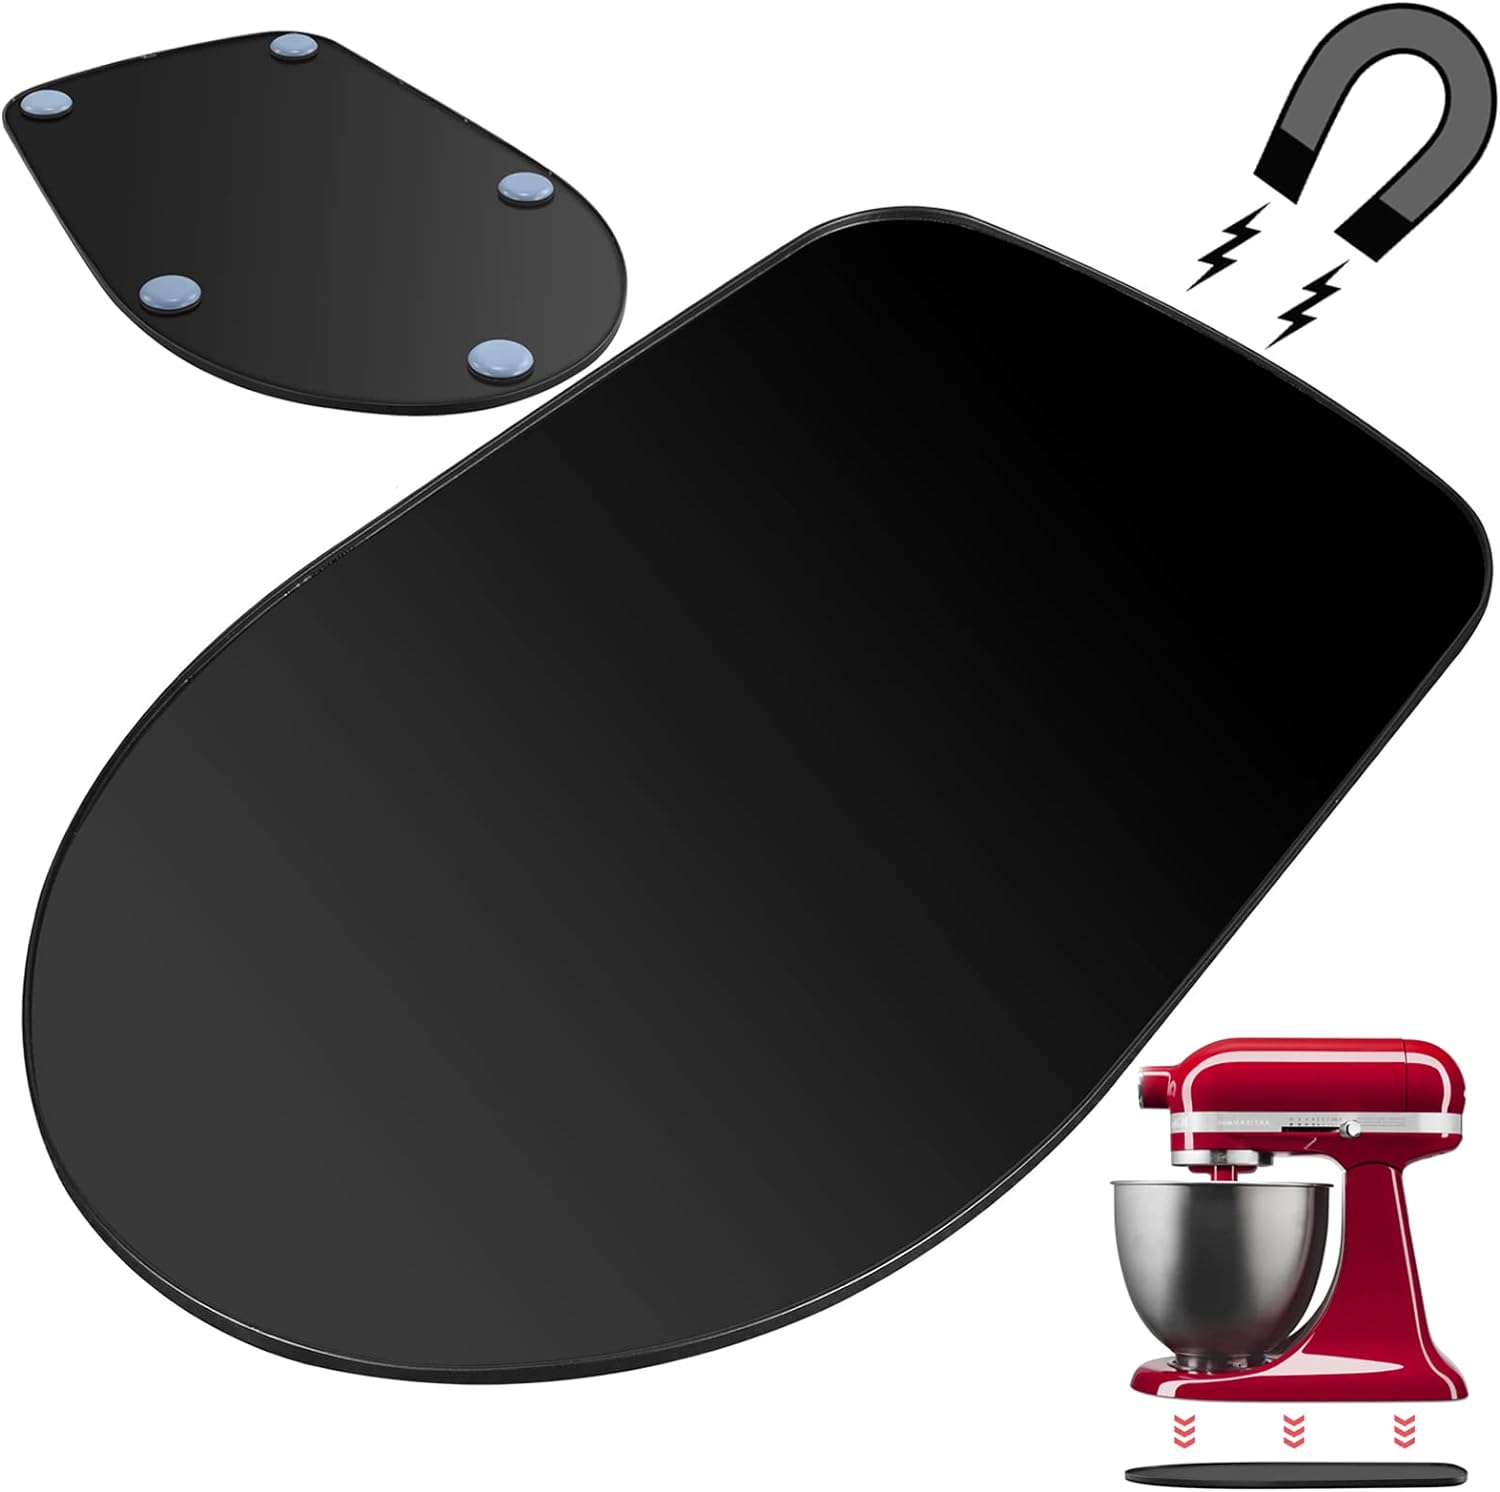 Metal Mixer Slider Mat for KitchenAid Stand Mixer – Appliance Sliding Tray Countertop Mixer Mover Slide Board Mats Pad Compatible with Kitchen Aid 4.5-5 Qt Tilt-Head Stand Mixer Artisan Classic